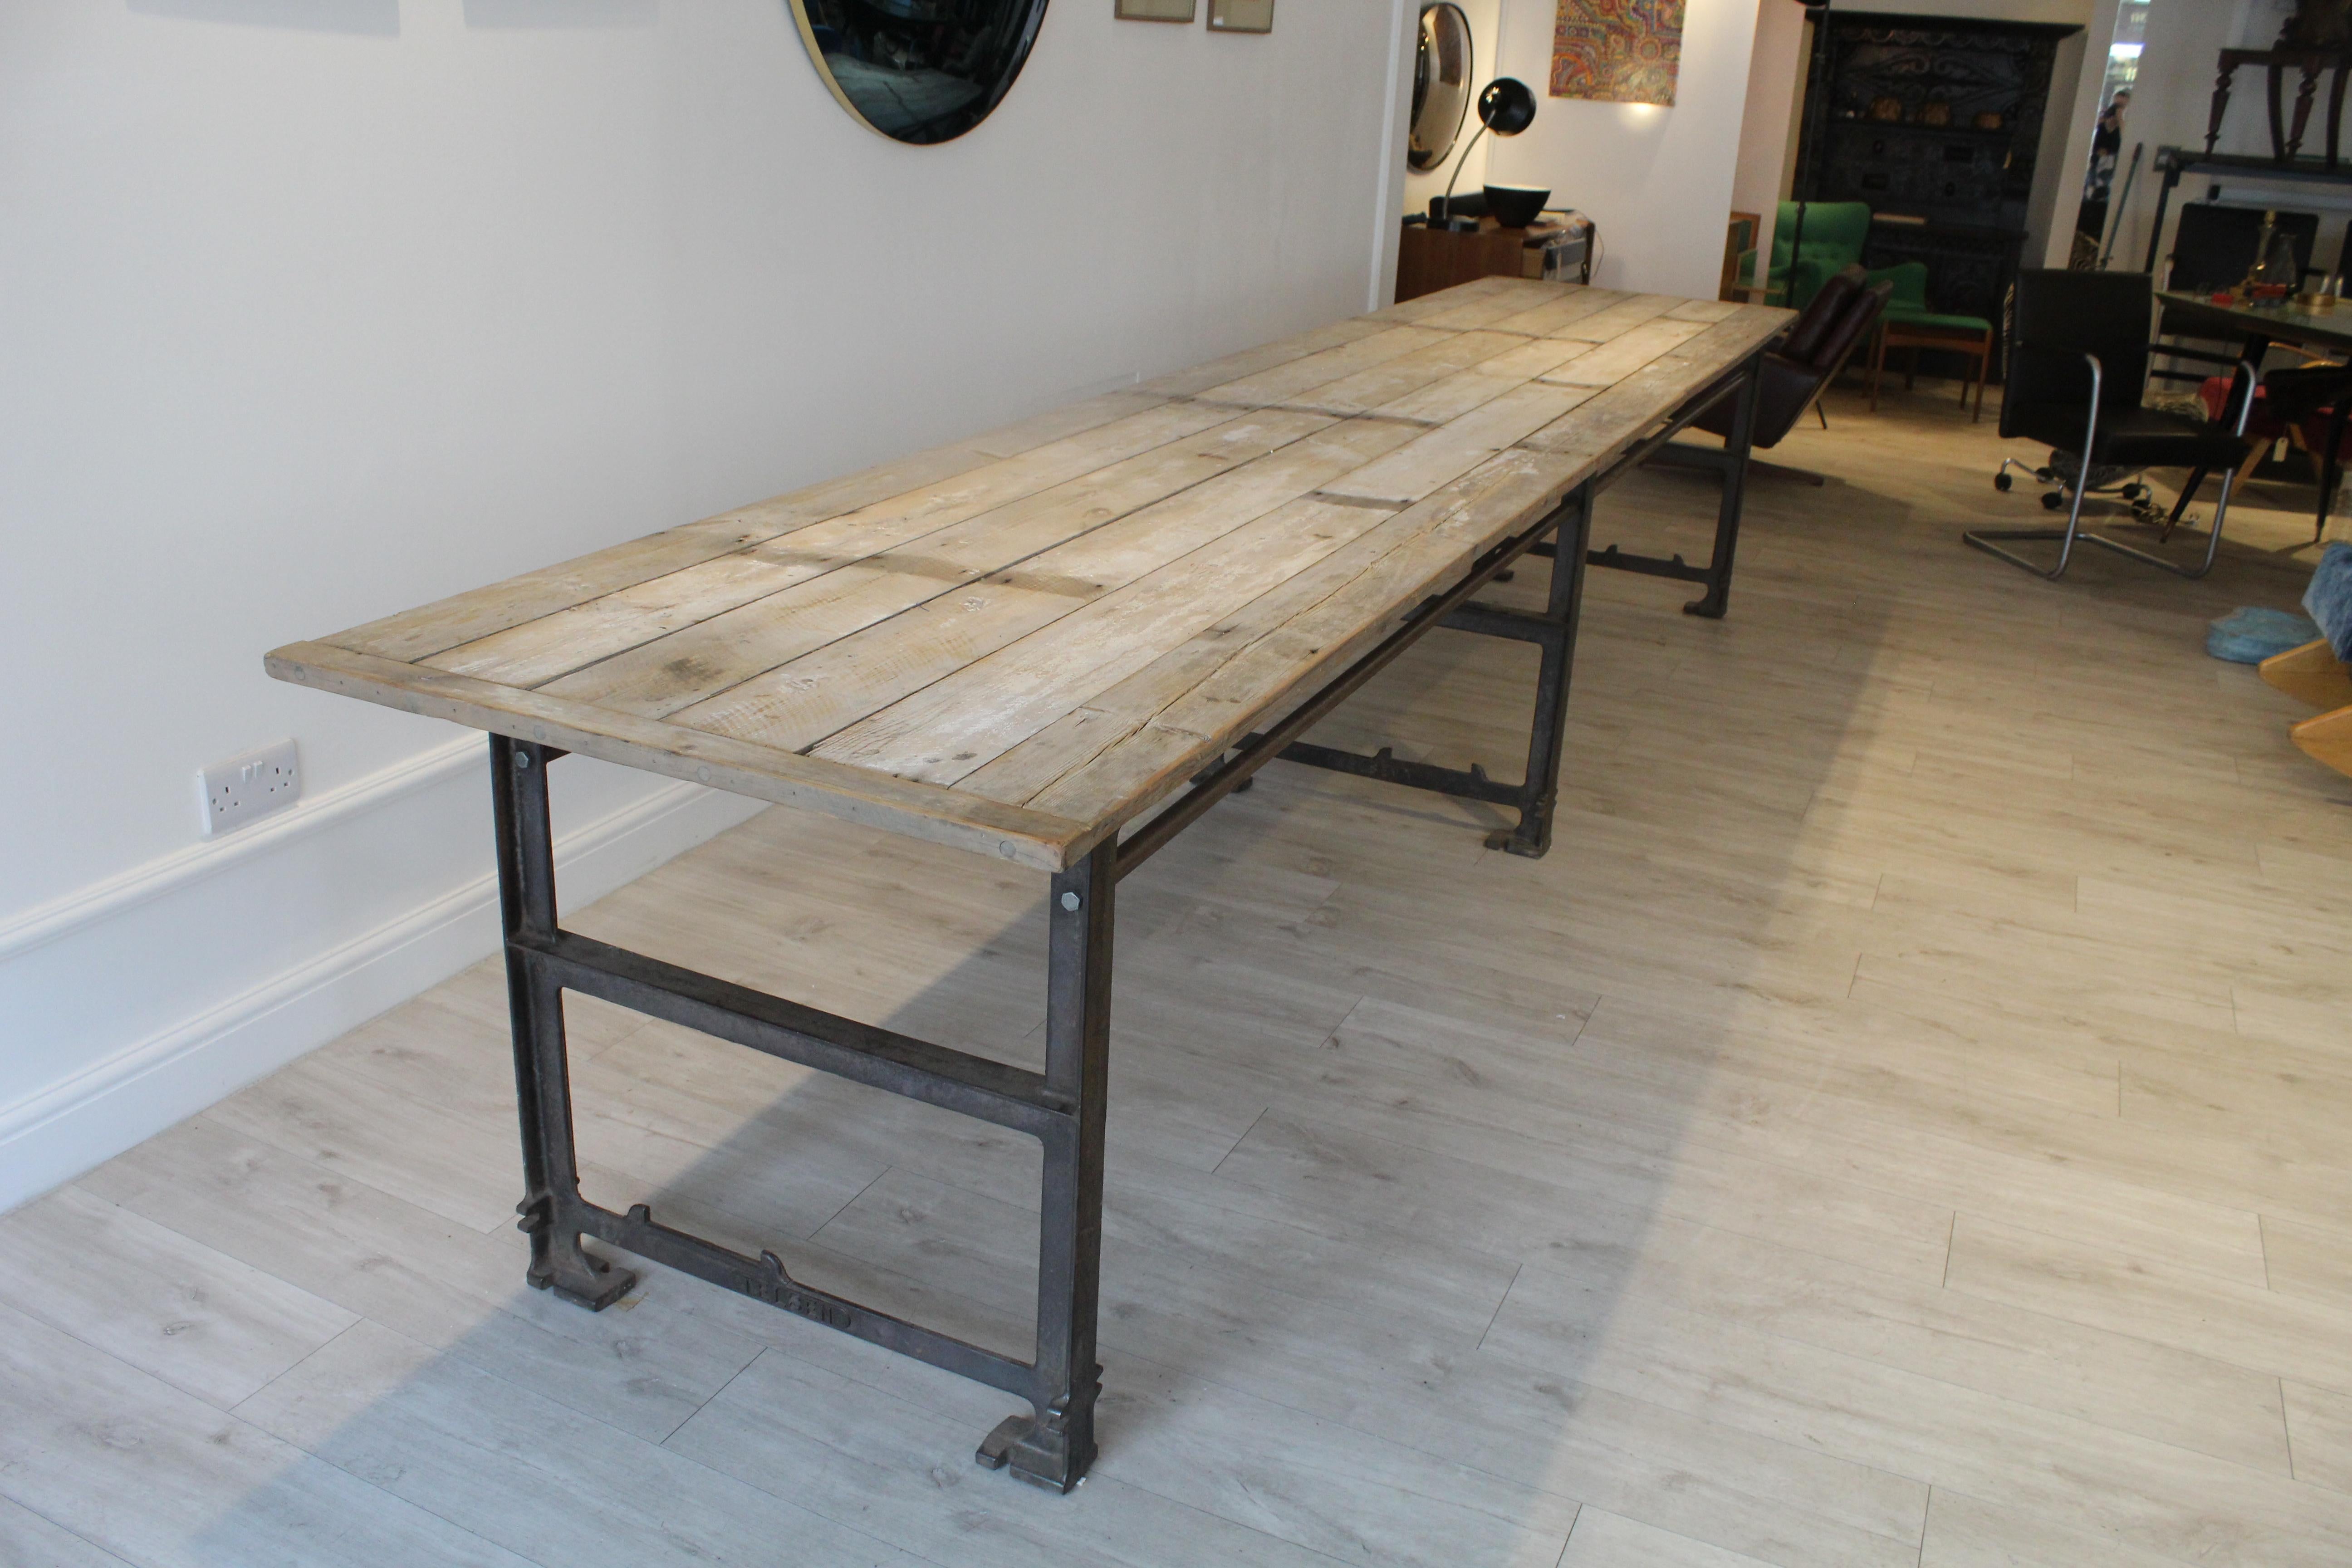 This is a rare, one off handmade extra long dining table.

The table top has been made from reclaimed wood with a rustic and scrub top finish. The base is made from reclaimed steel which gives an industrial and stylish style to the table.